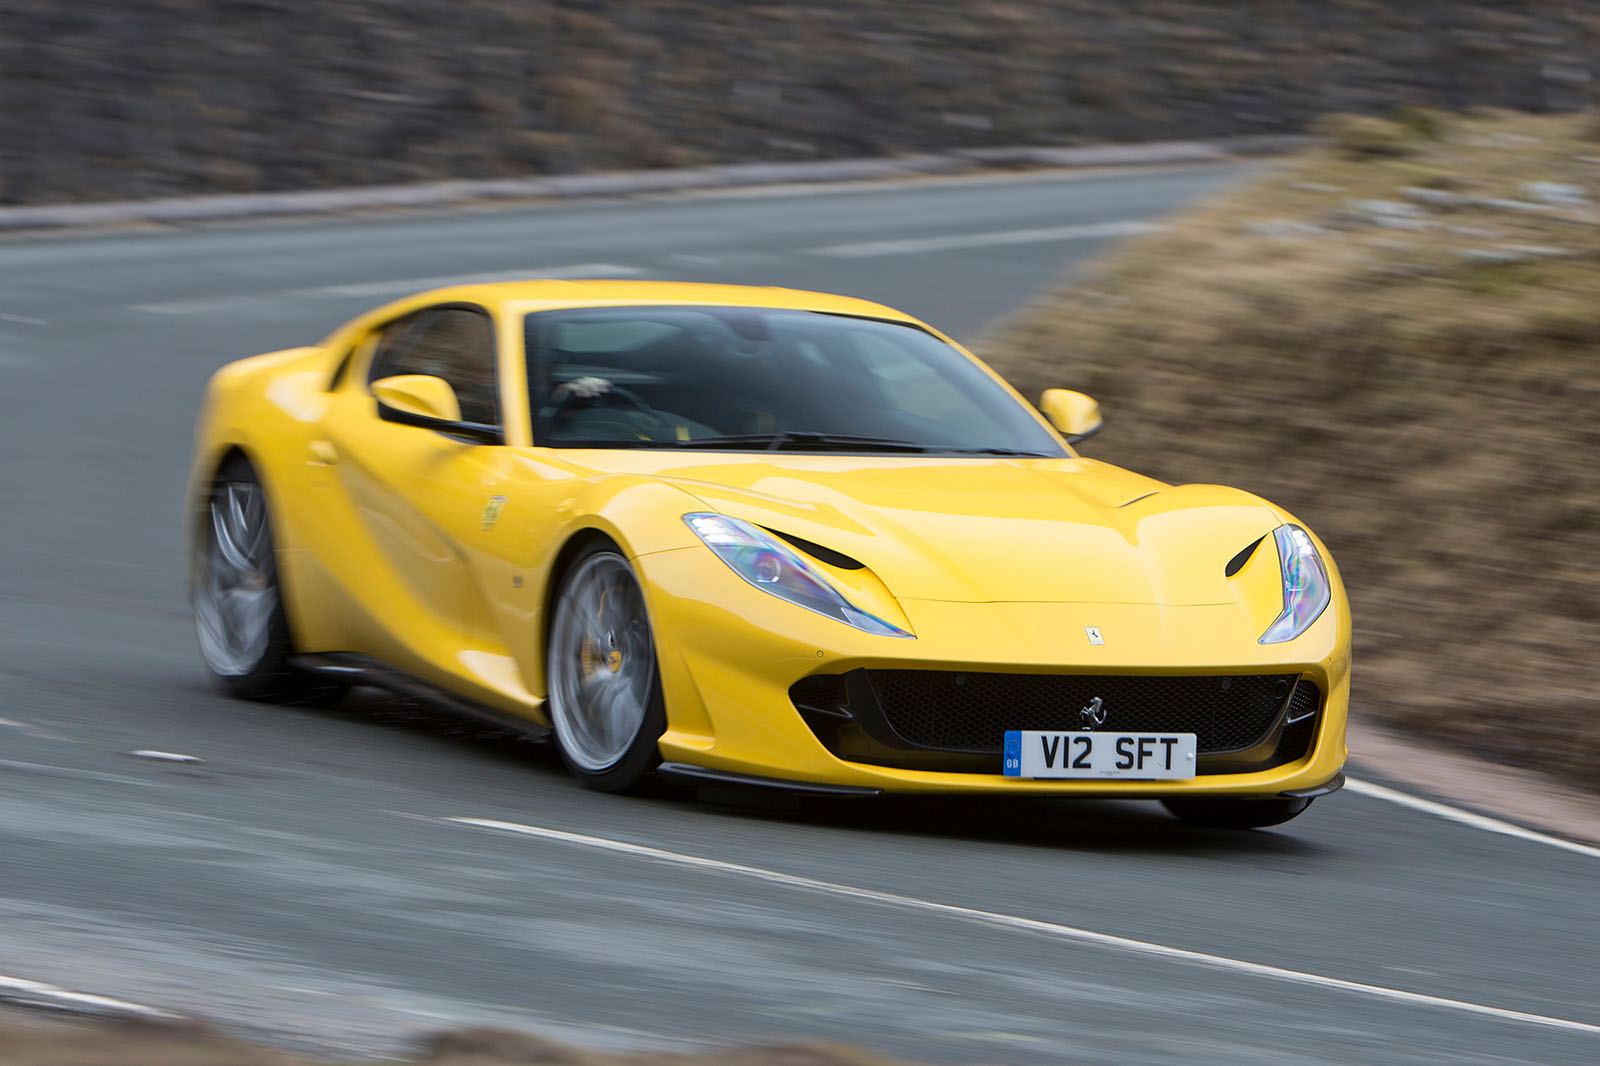 Ferrari 812 Superfast 2018 road test review on the road